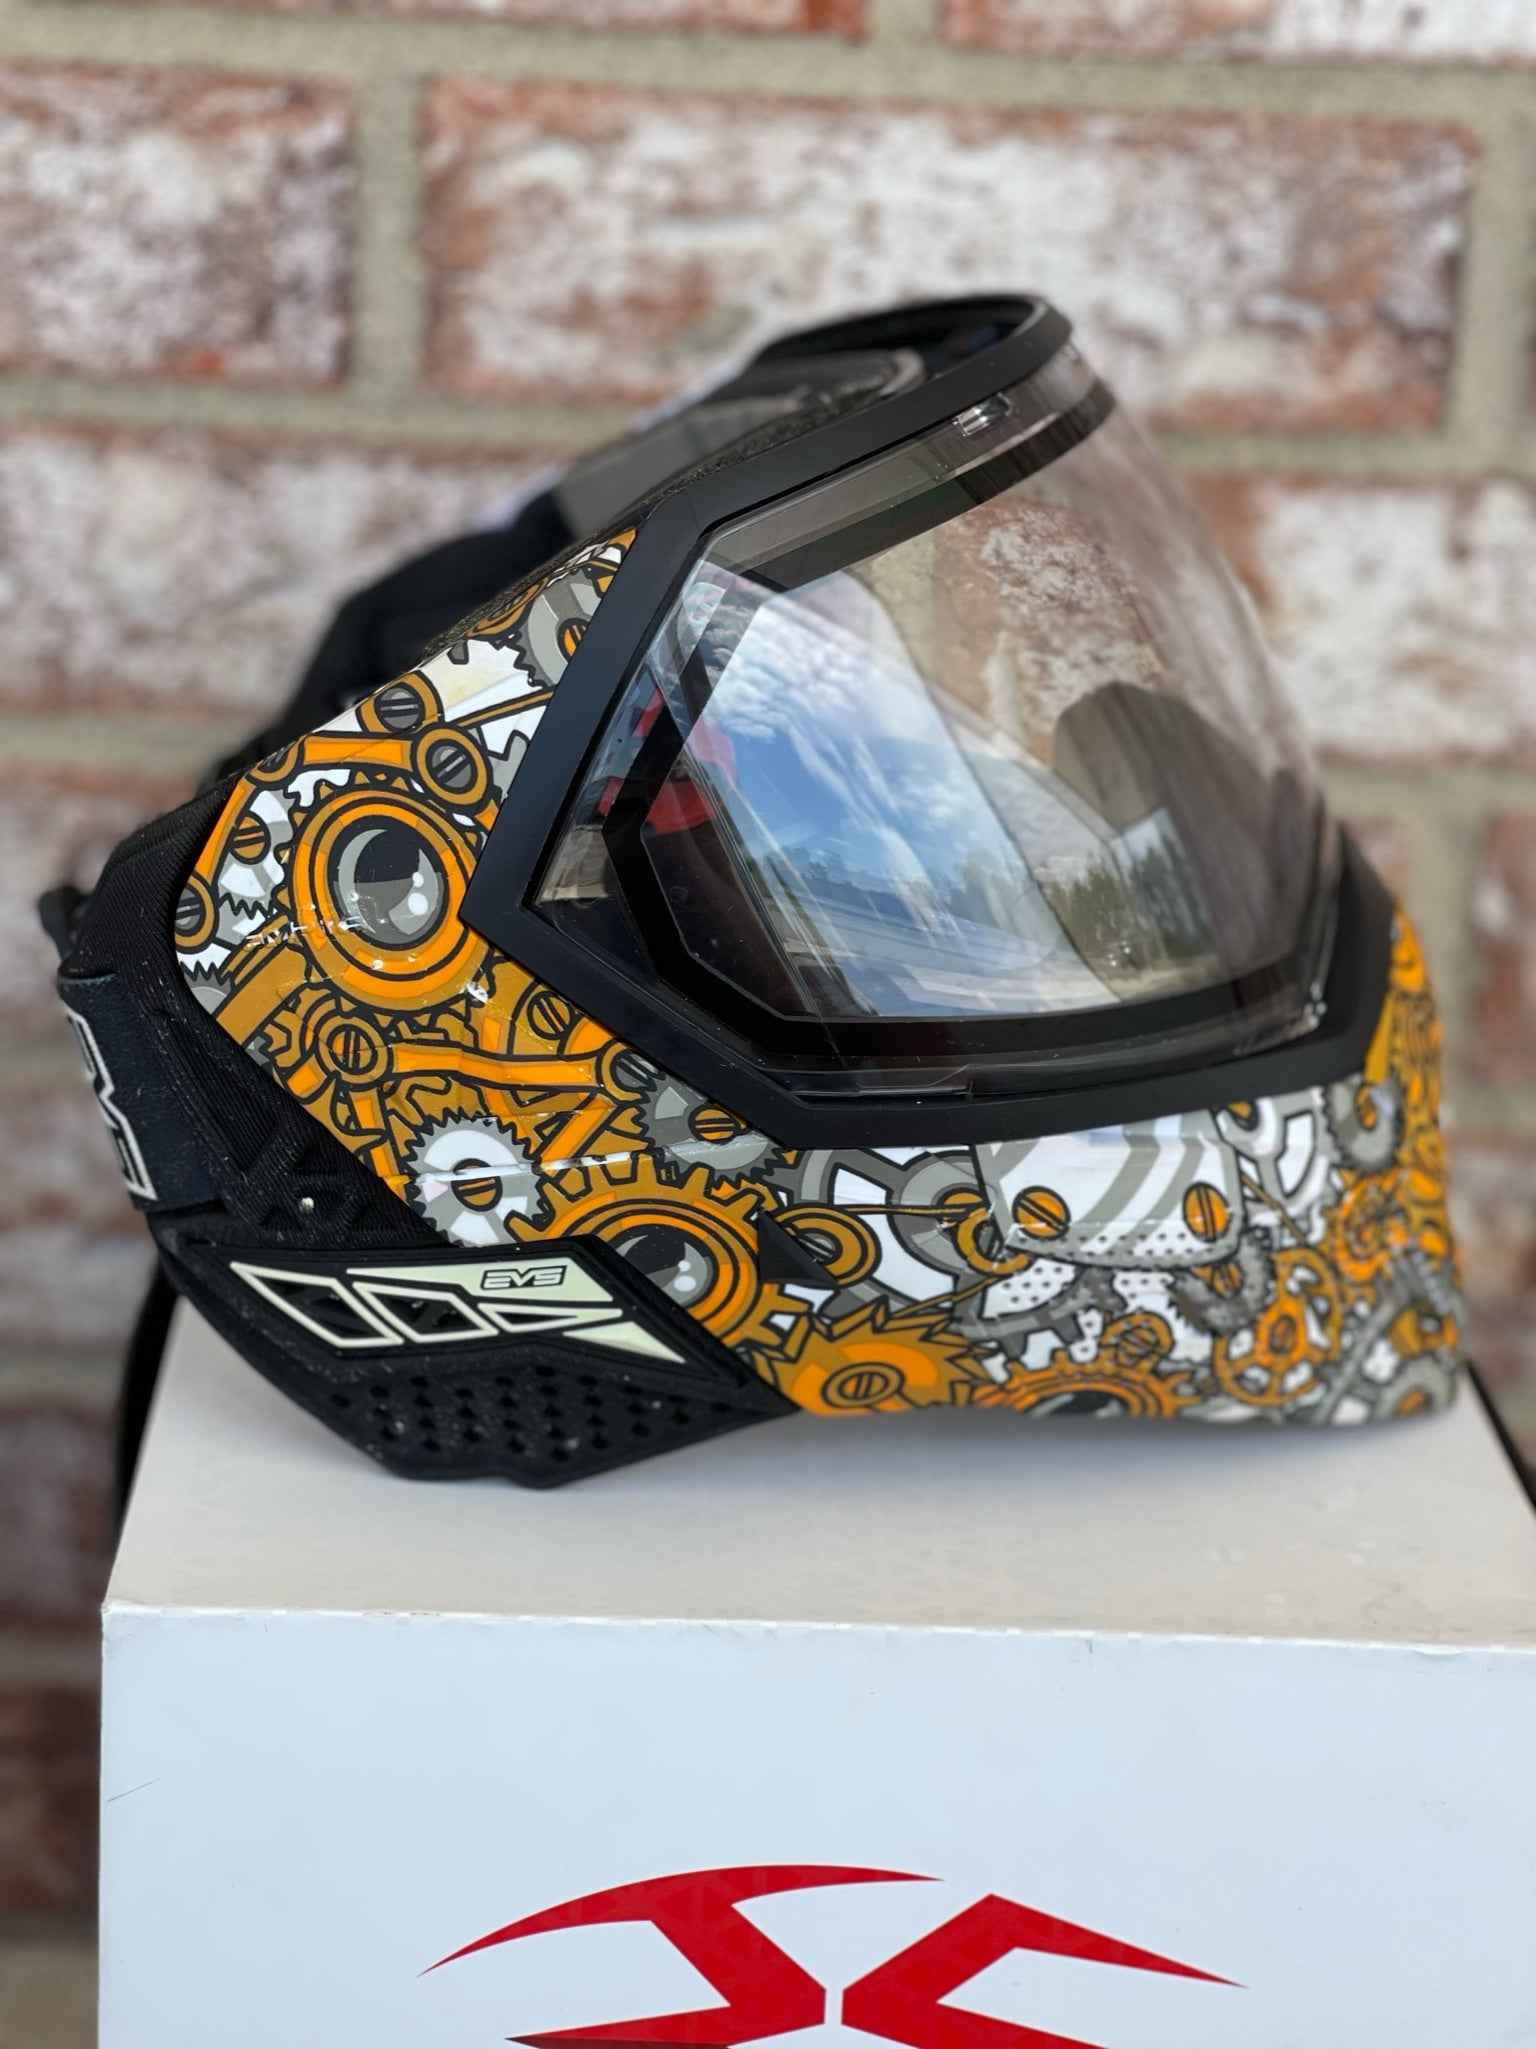 Used Empire EVS Paintball Mask - Gears